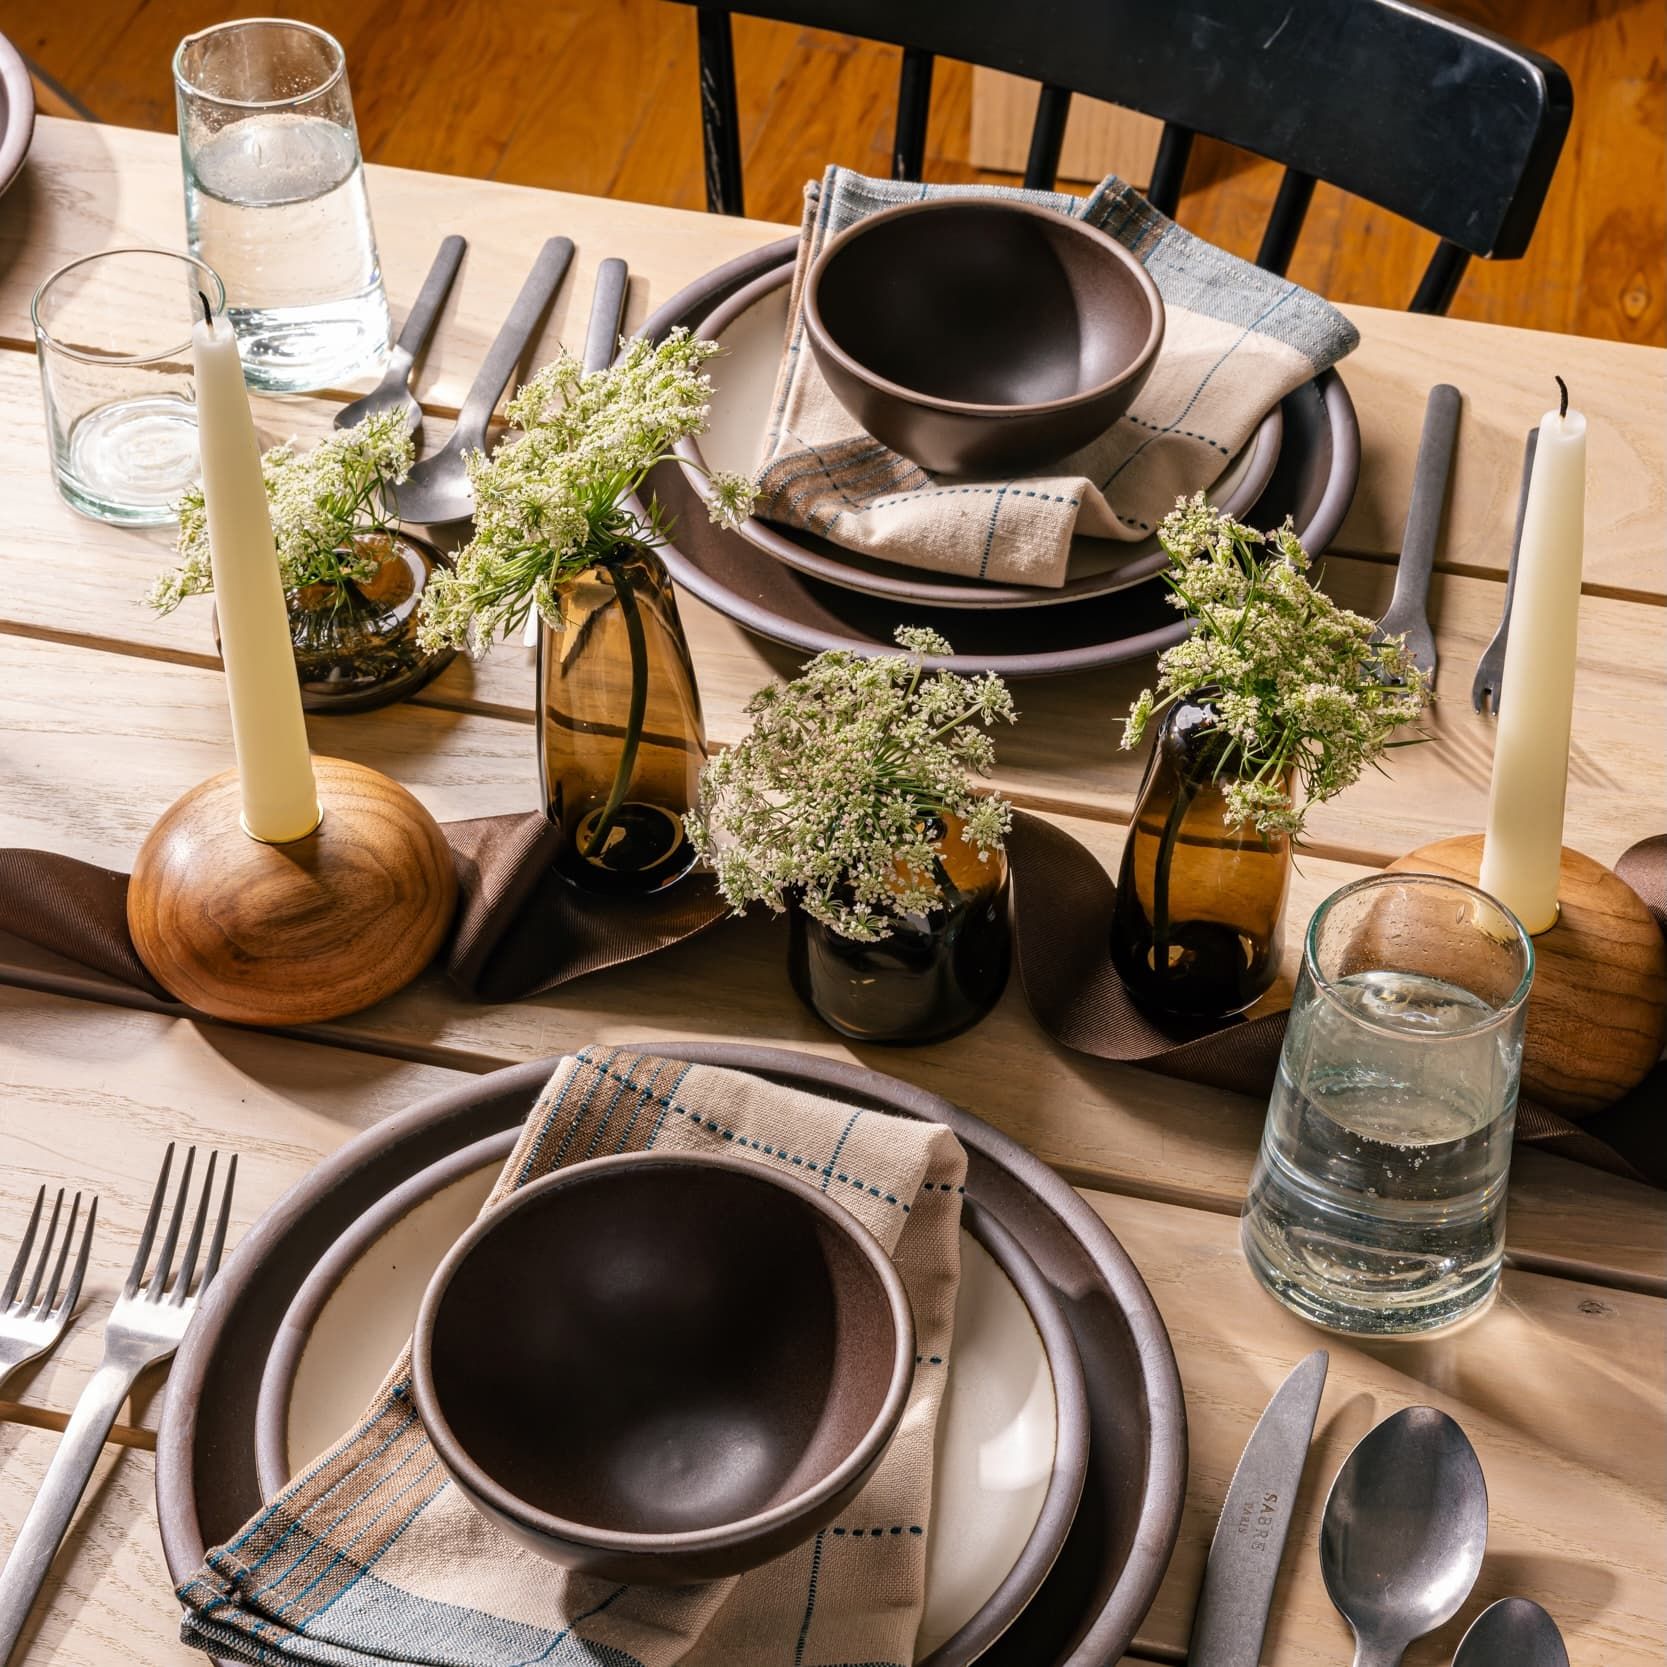 On a set table is two place settings with dark brown and cream ceramic plates and bowls, simple water glasses, steel flatware, simple filler flowers in vases, and round short wood candleholders with cream taper candles.